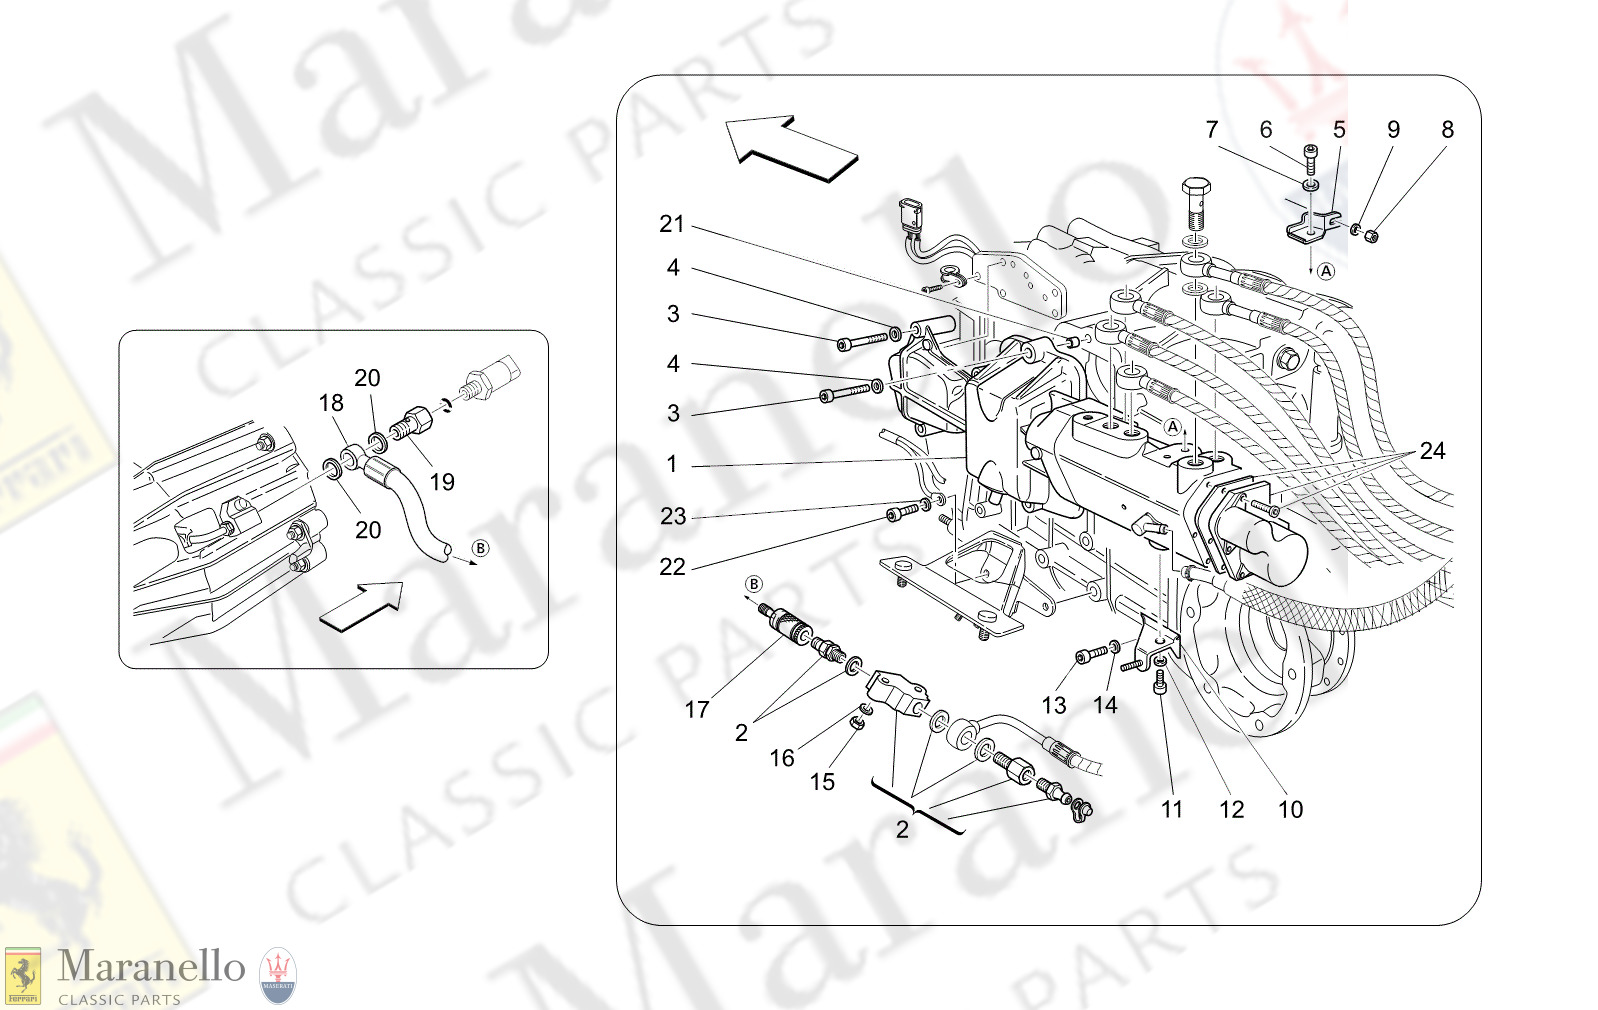 02.01 - 1 - 0201 - 1 Actuation Hydraulic Parts For F1 Gearbox